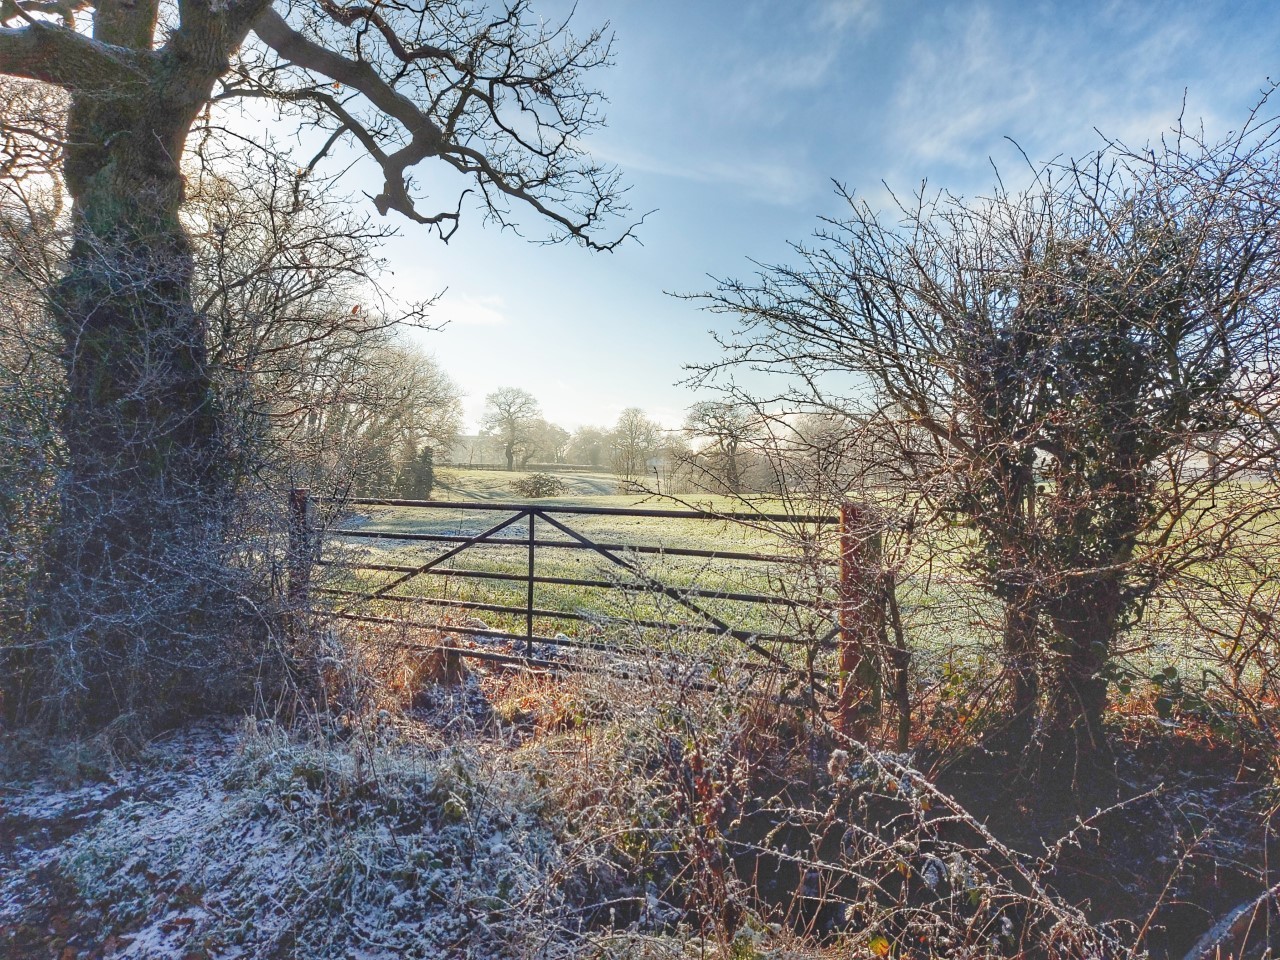 Blakeden Lane, Winsford, just before the snow by Mike Hughes